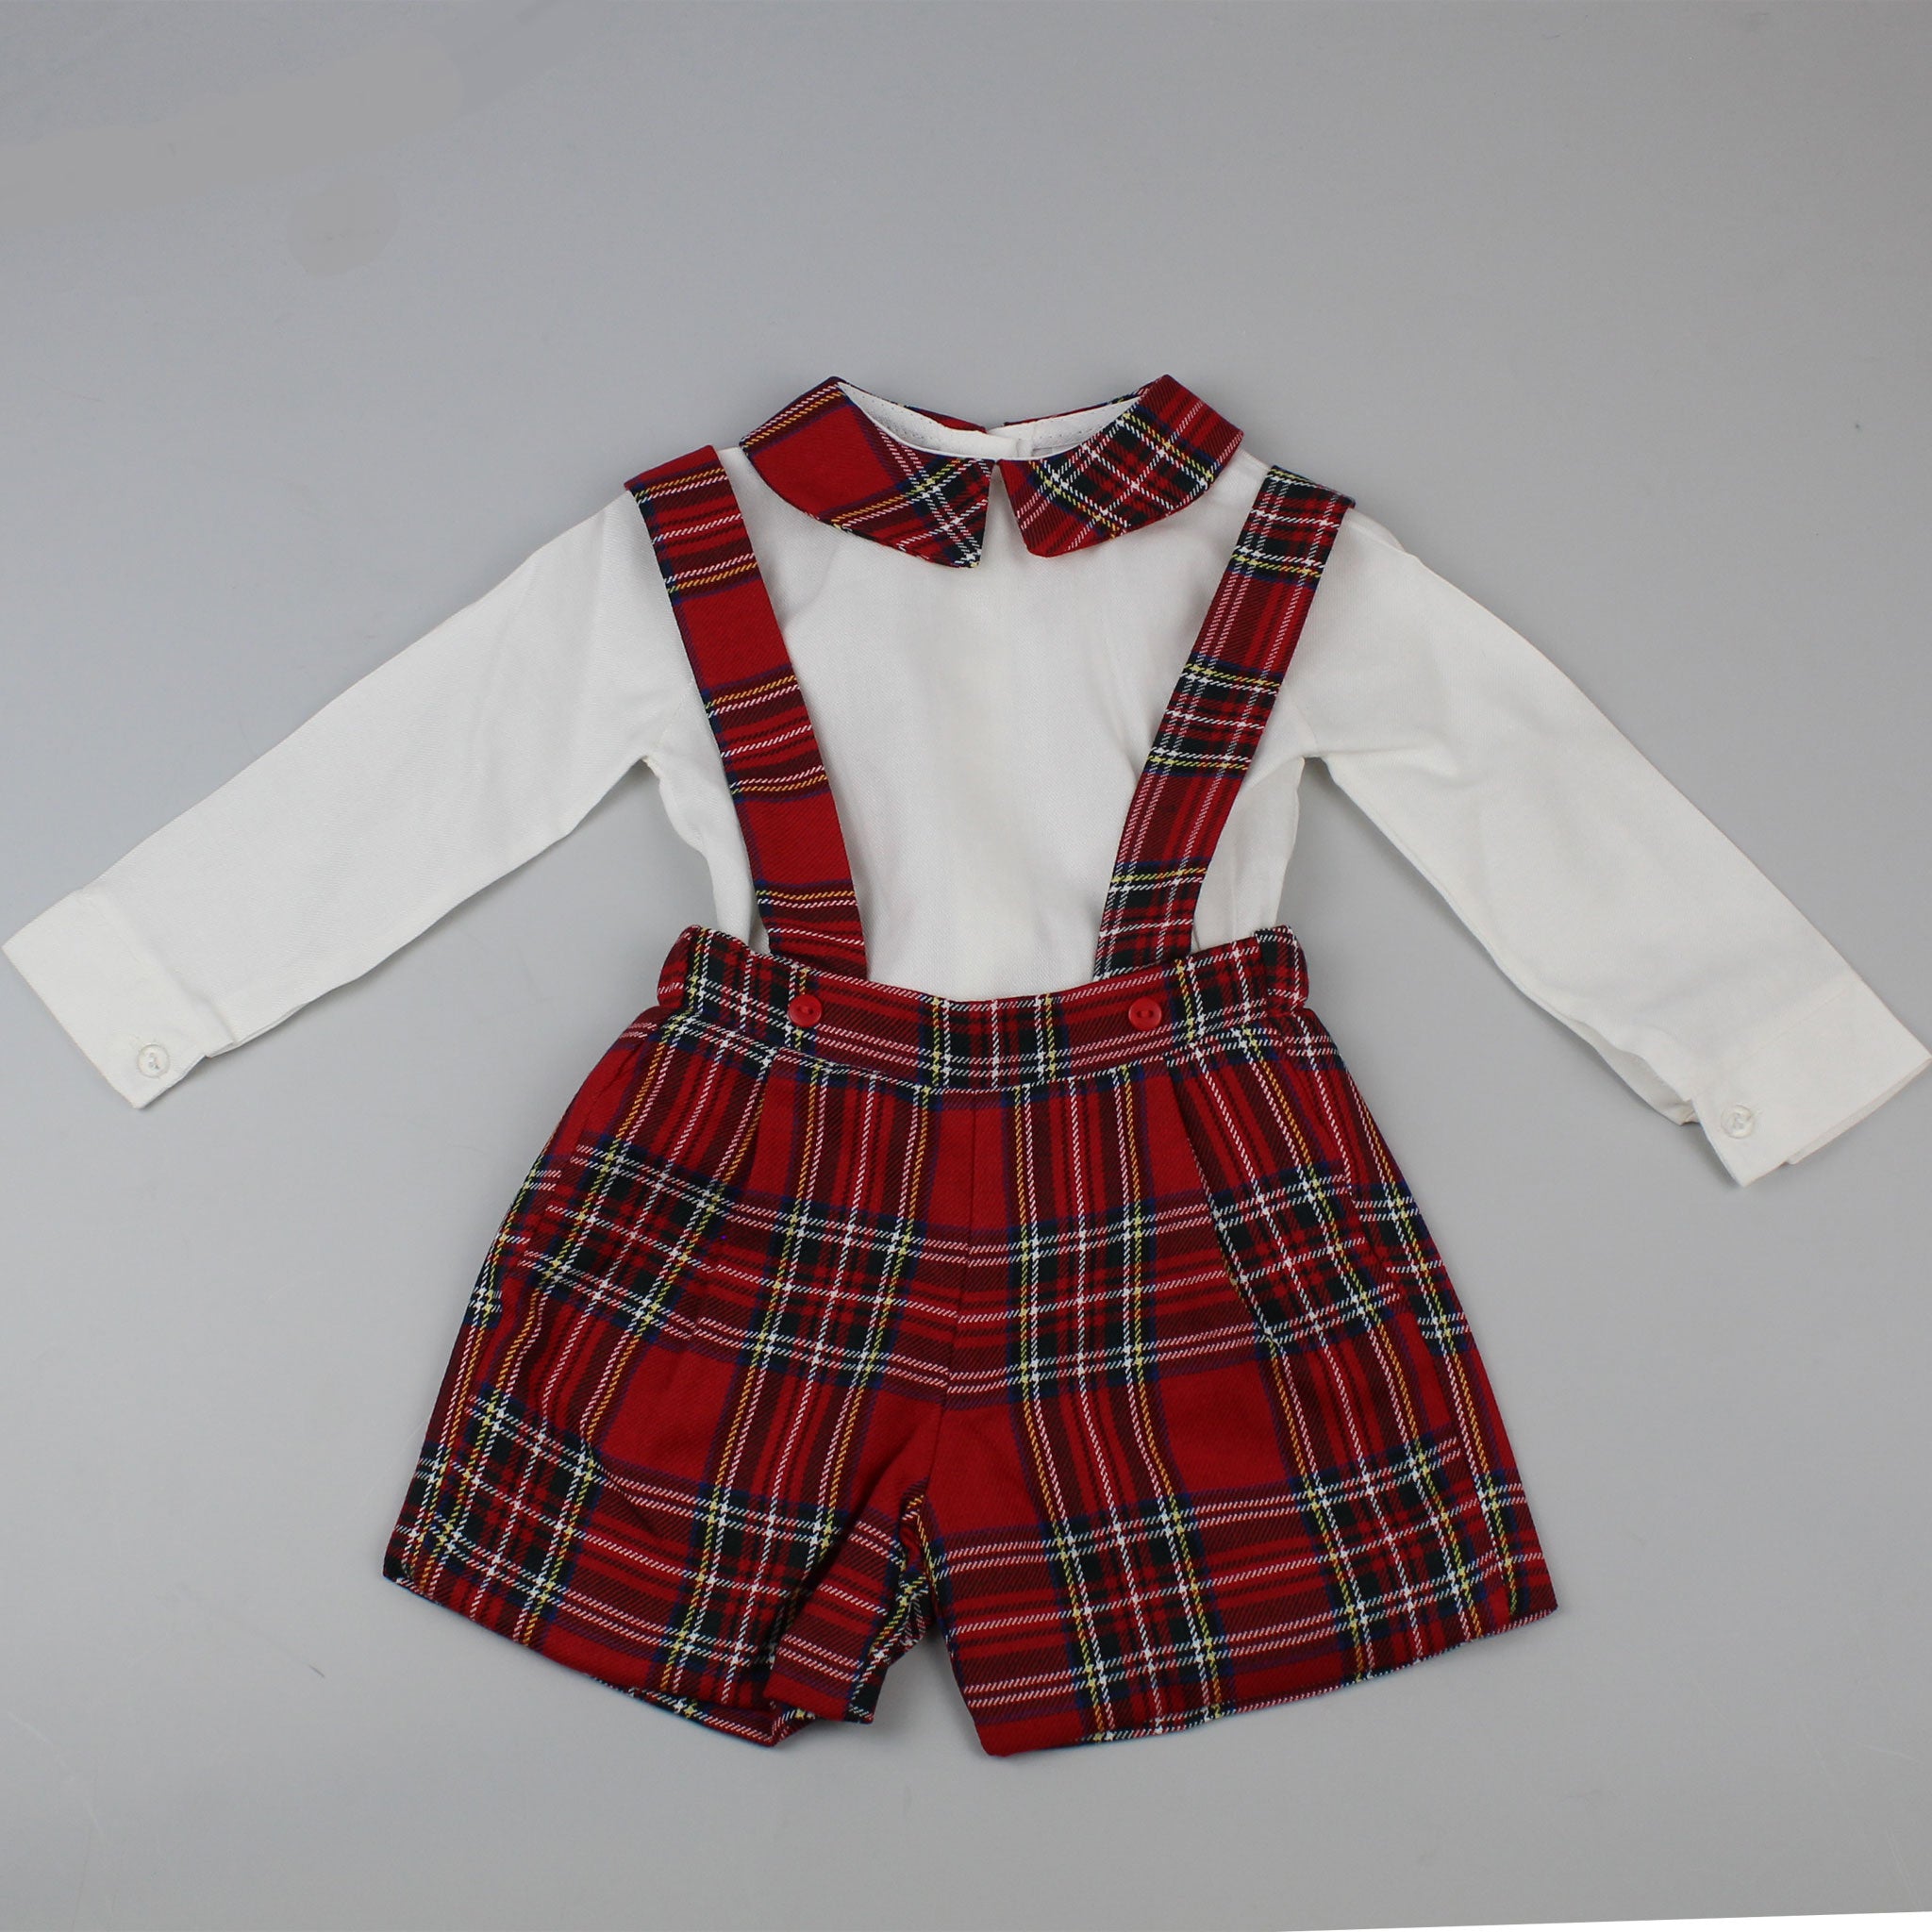 Baby Boys Tartan Two Piece Outfit - Shirt and Short Set